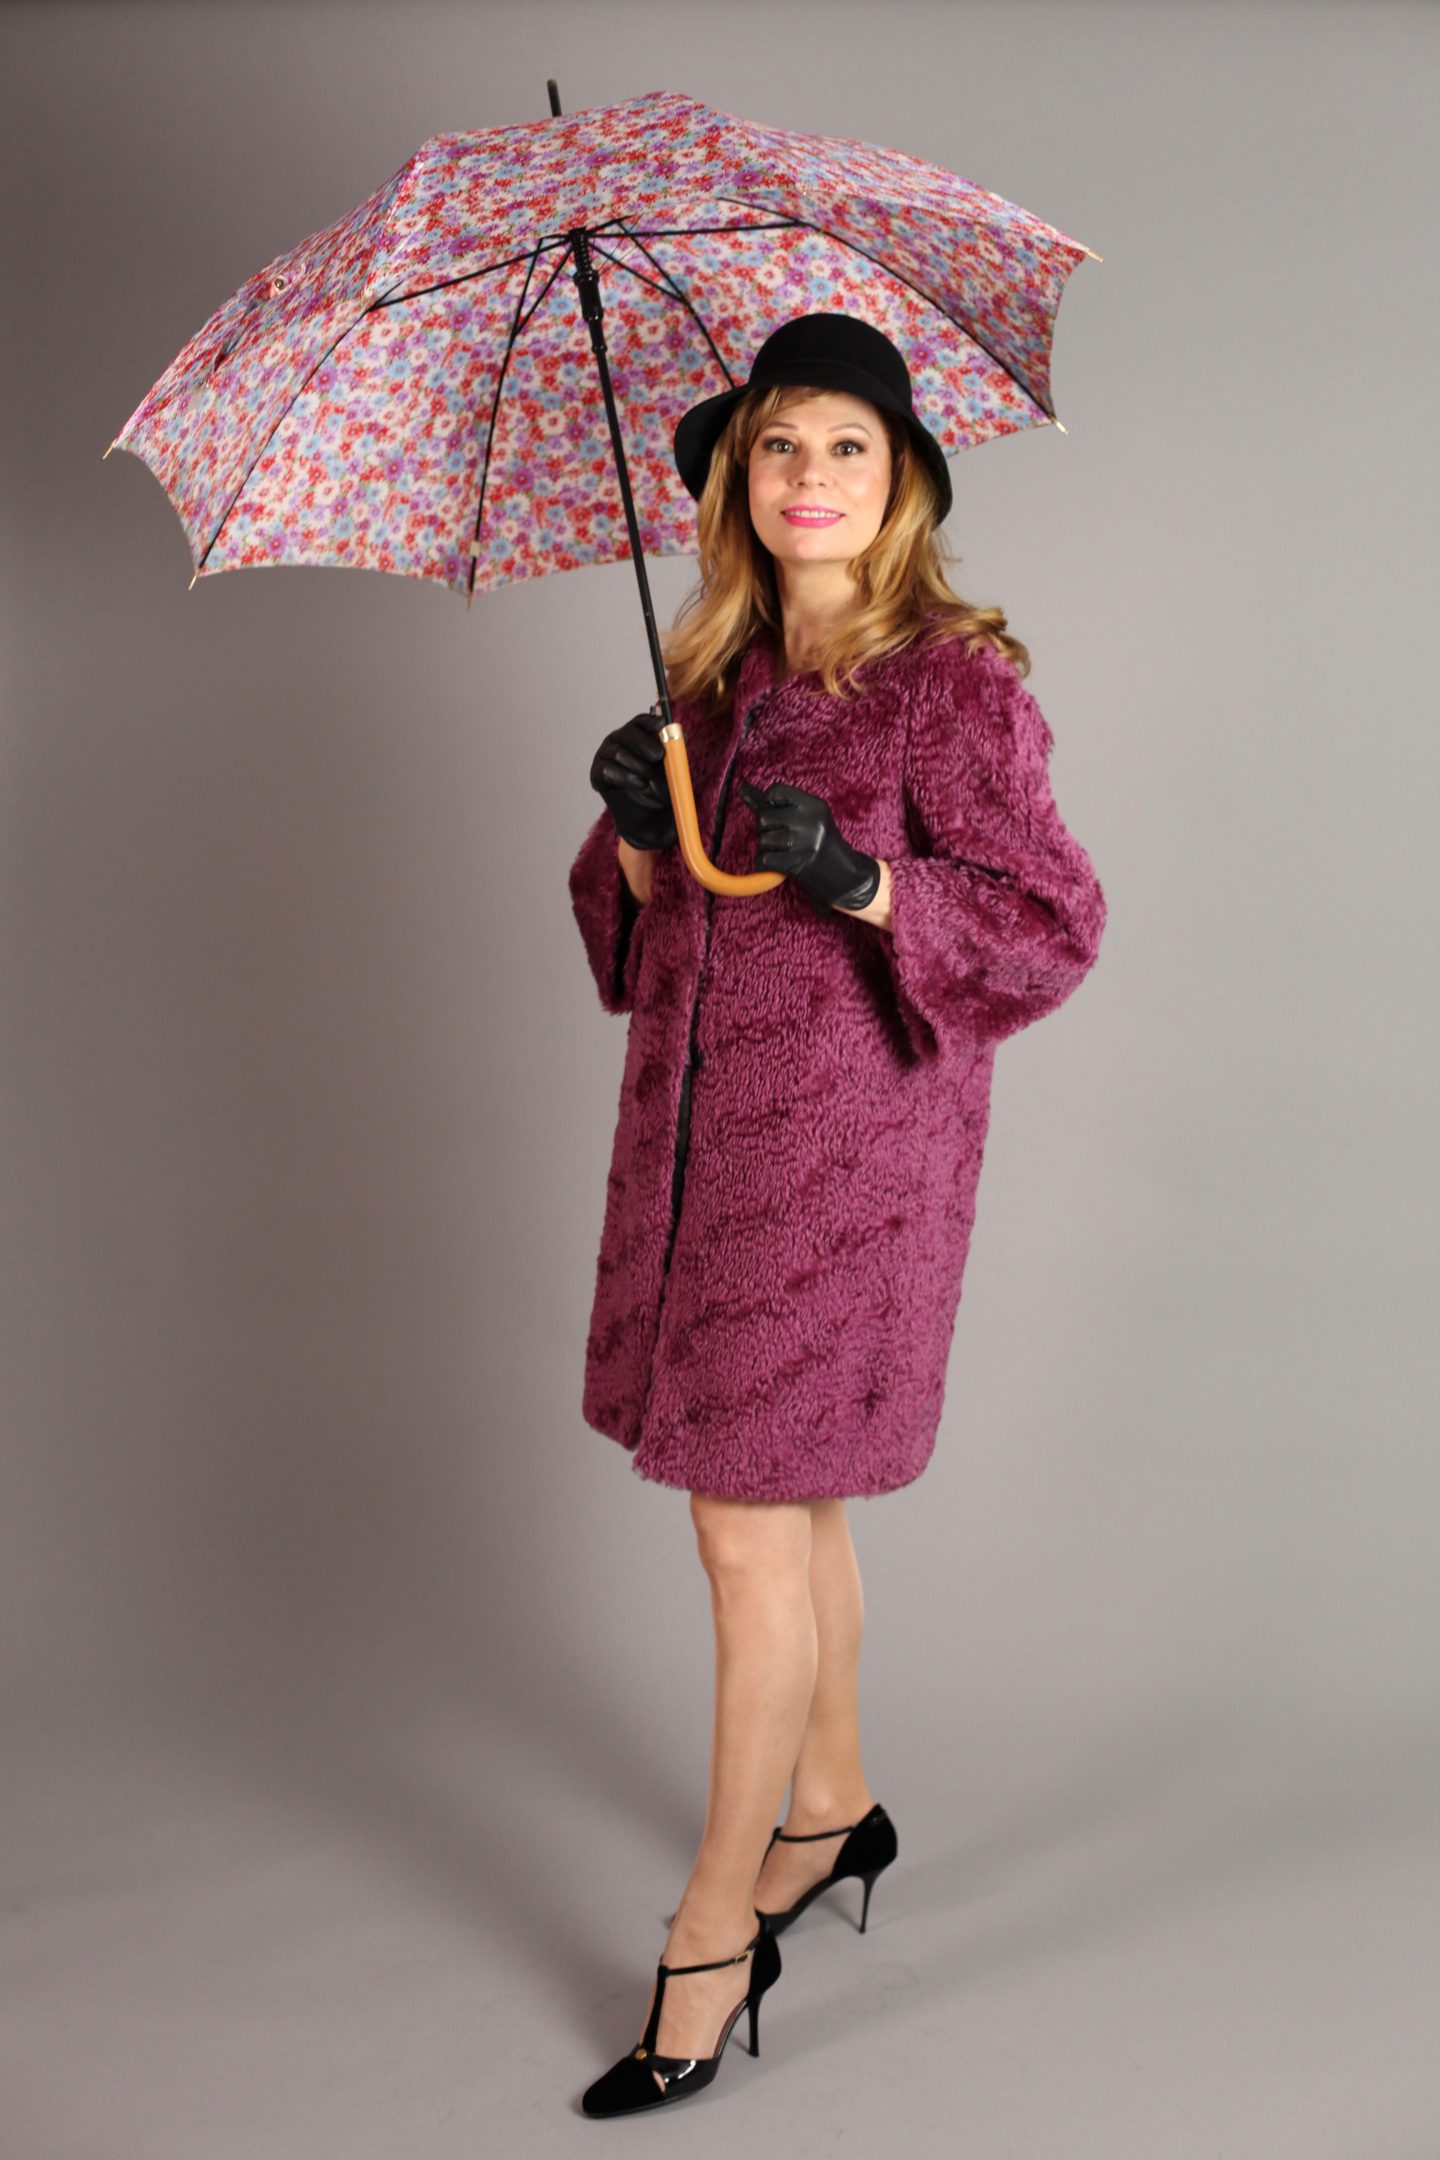 4 ABSOLUTE GORGEOUS COATS AND UMBRELLAS TO PROTECT YOURSELF FROM RAIN